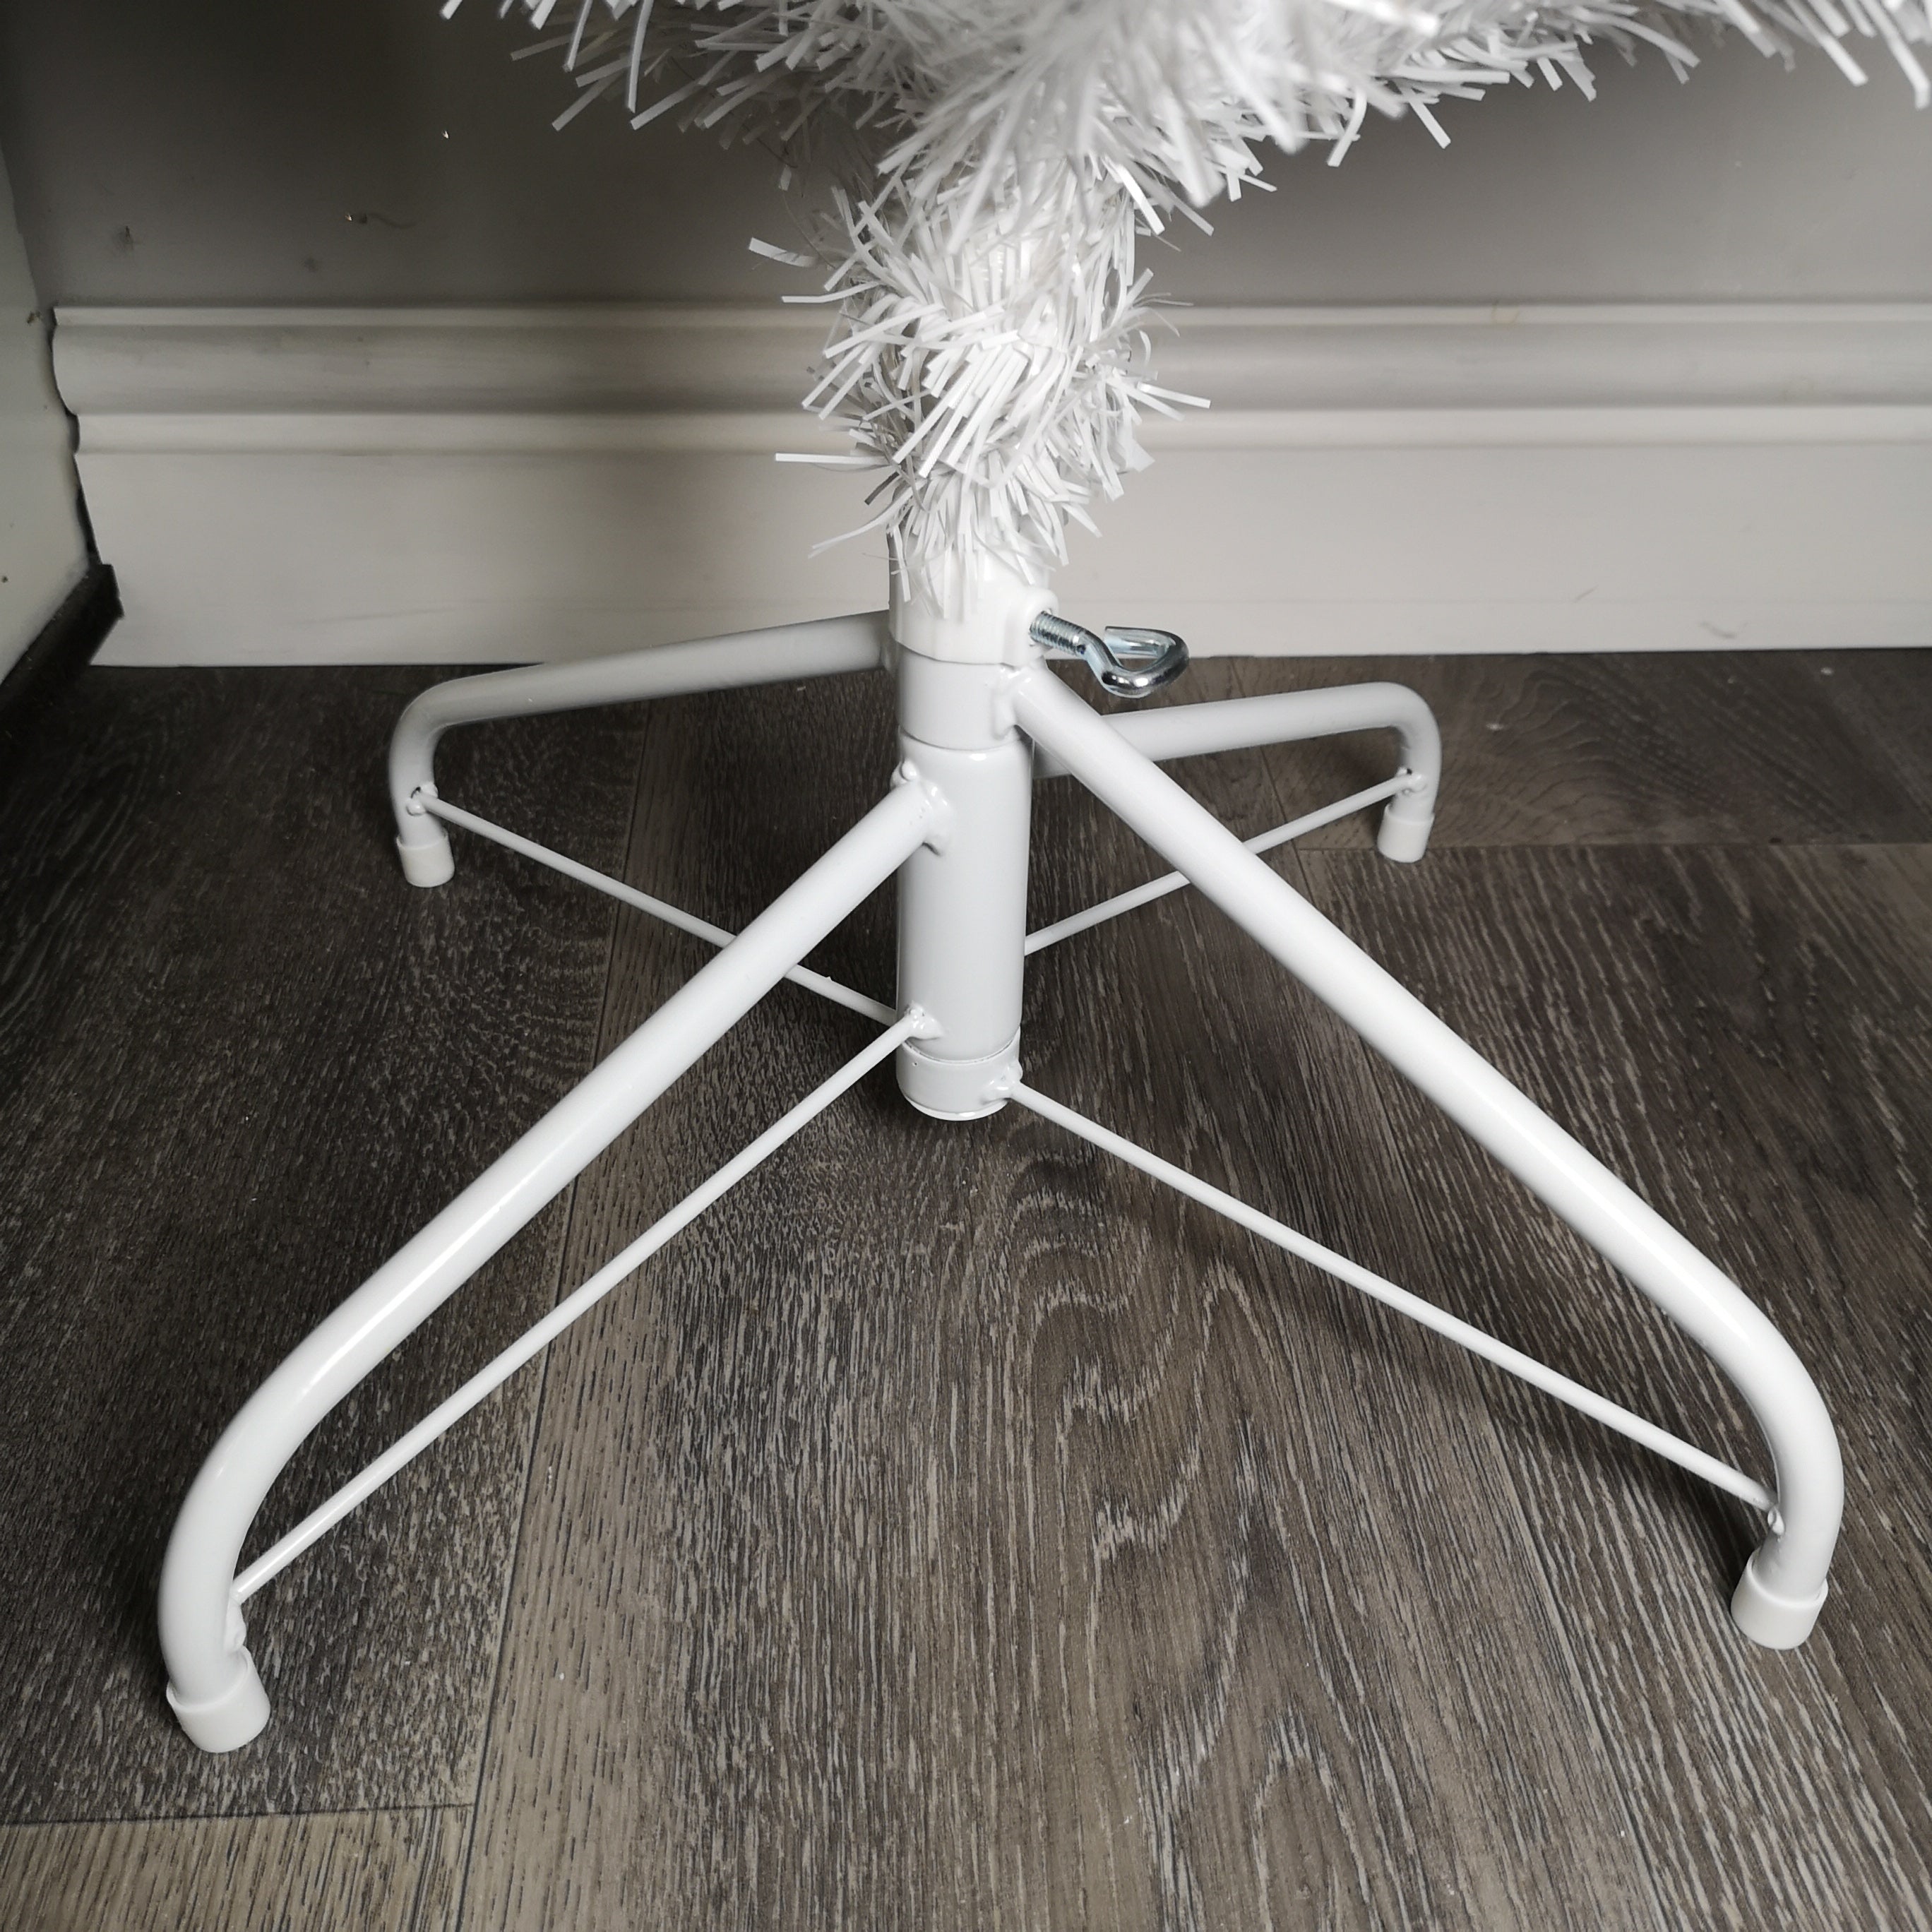 6.5ft (2m) Premier Pencil Style Slim Christmas Tree in White